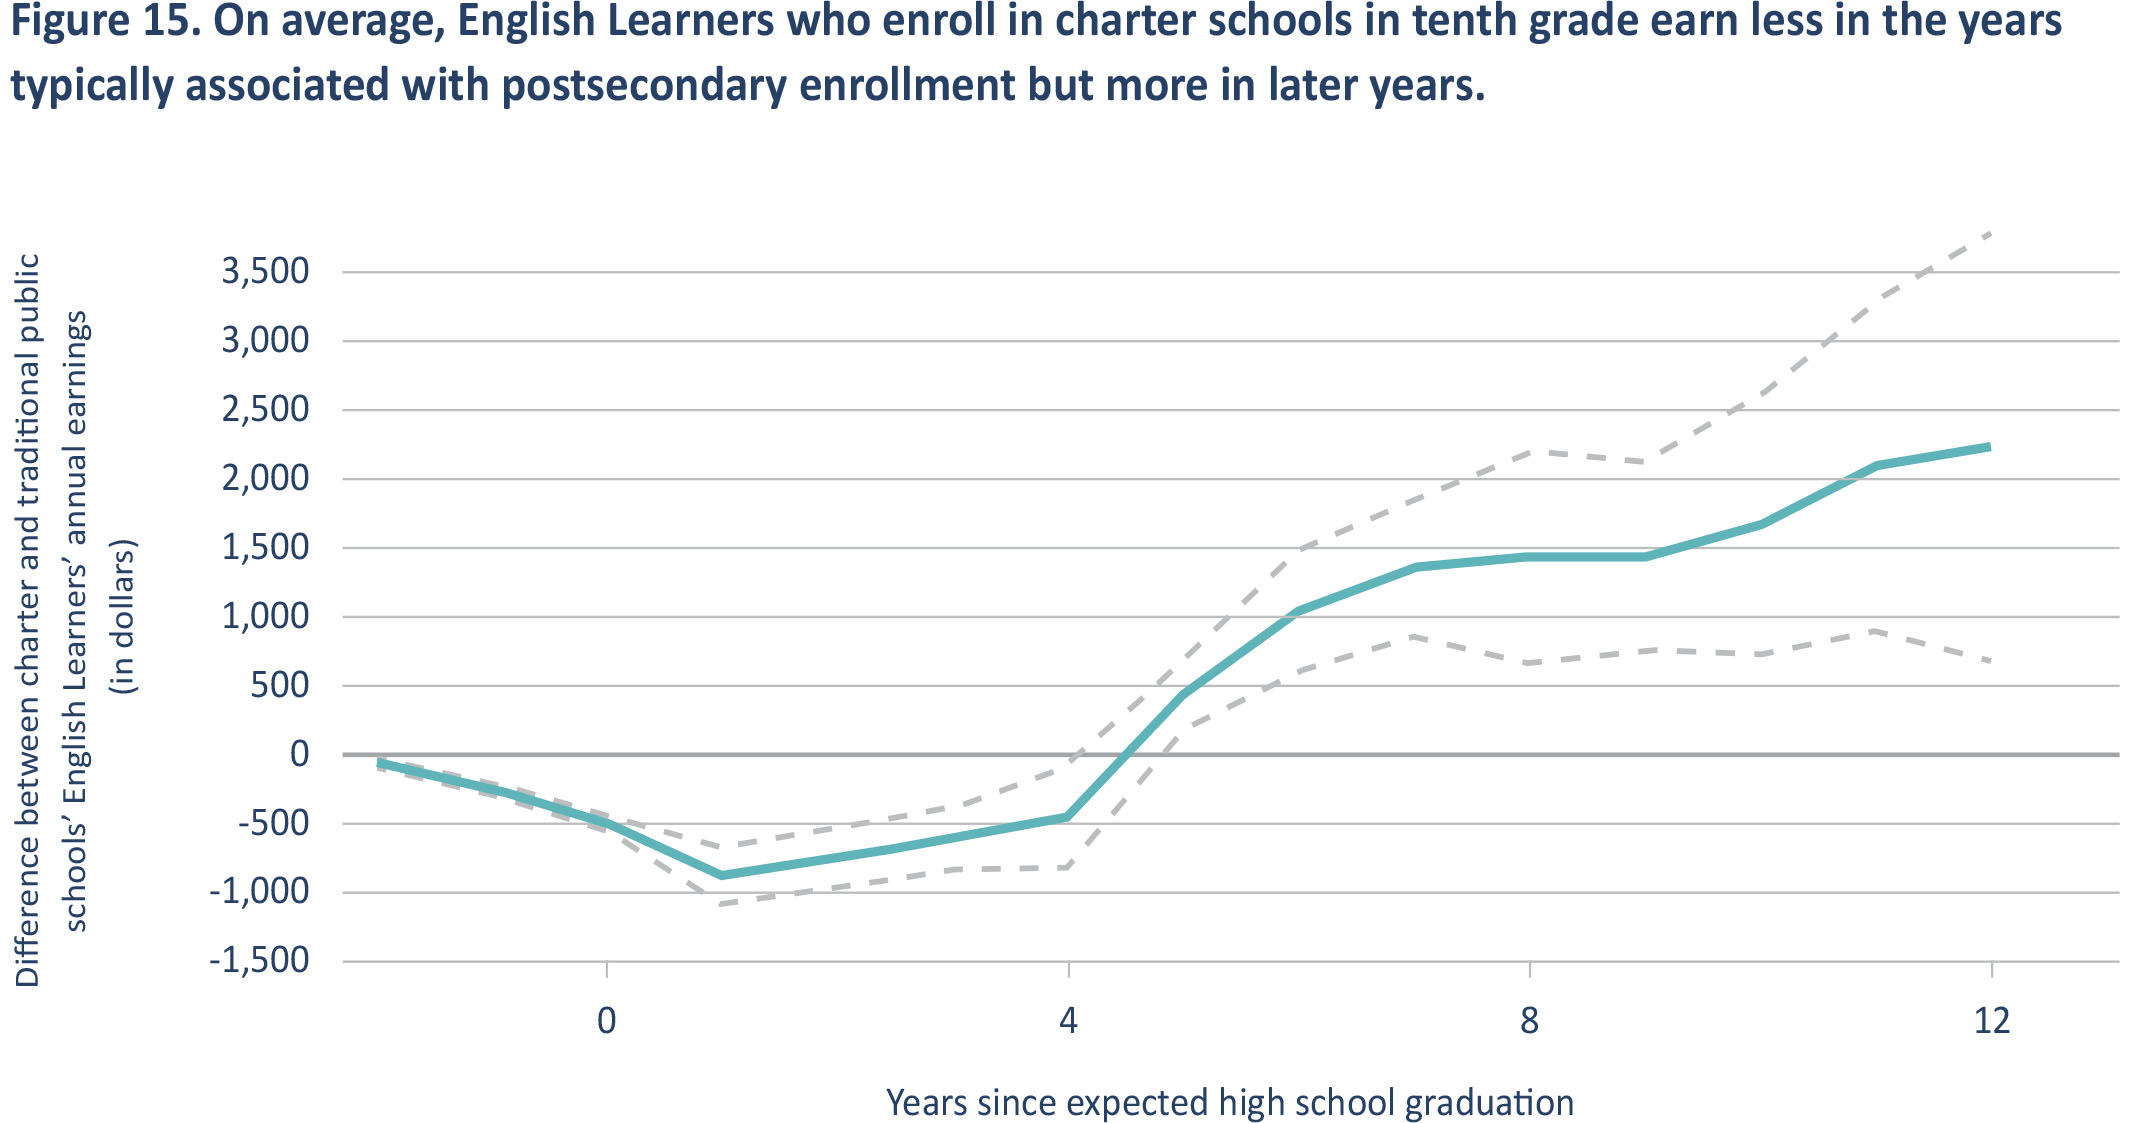 Figure 15. On average, English Learners who enroll in charter schools in tenth grade earn less in the years typically associated with postsecondary enrollment but more in later years.